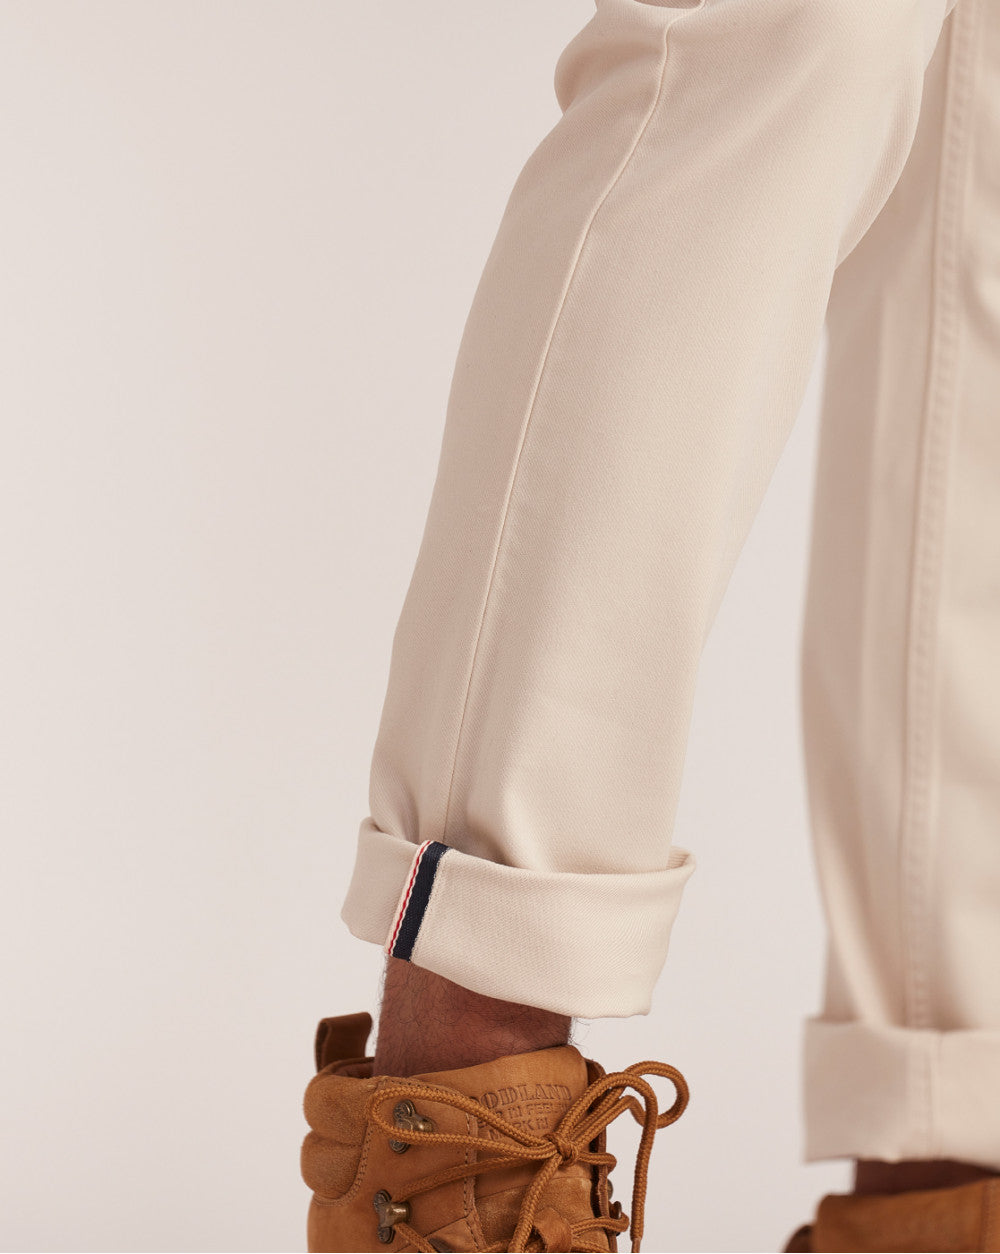 Skinny Fit Five-Pocket Luxe Pants - Off White